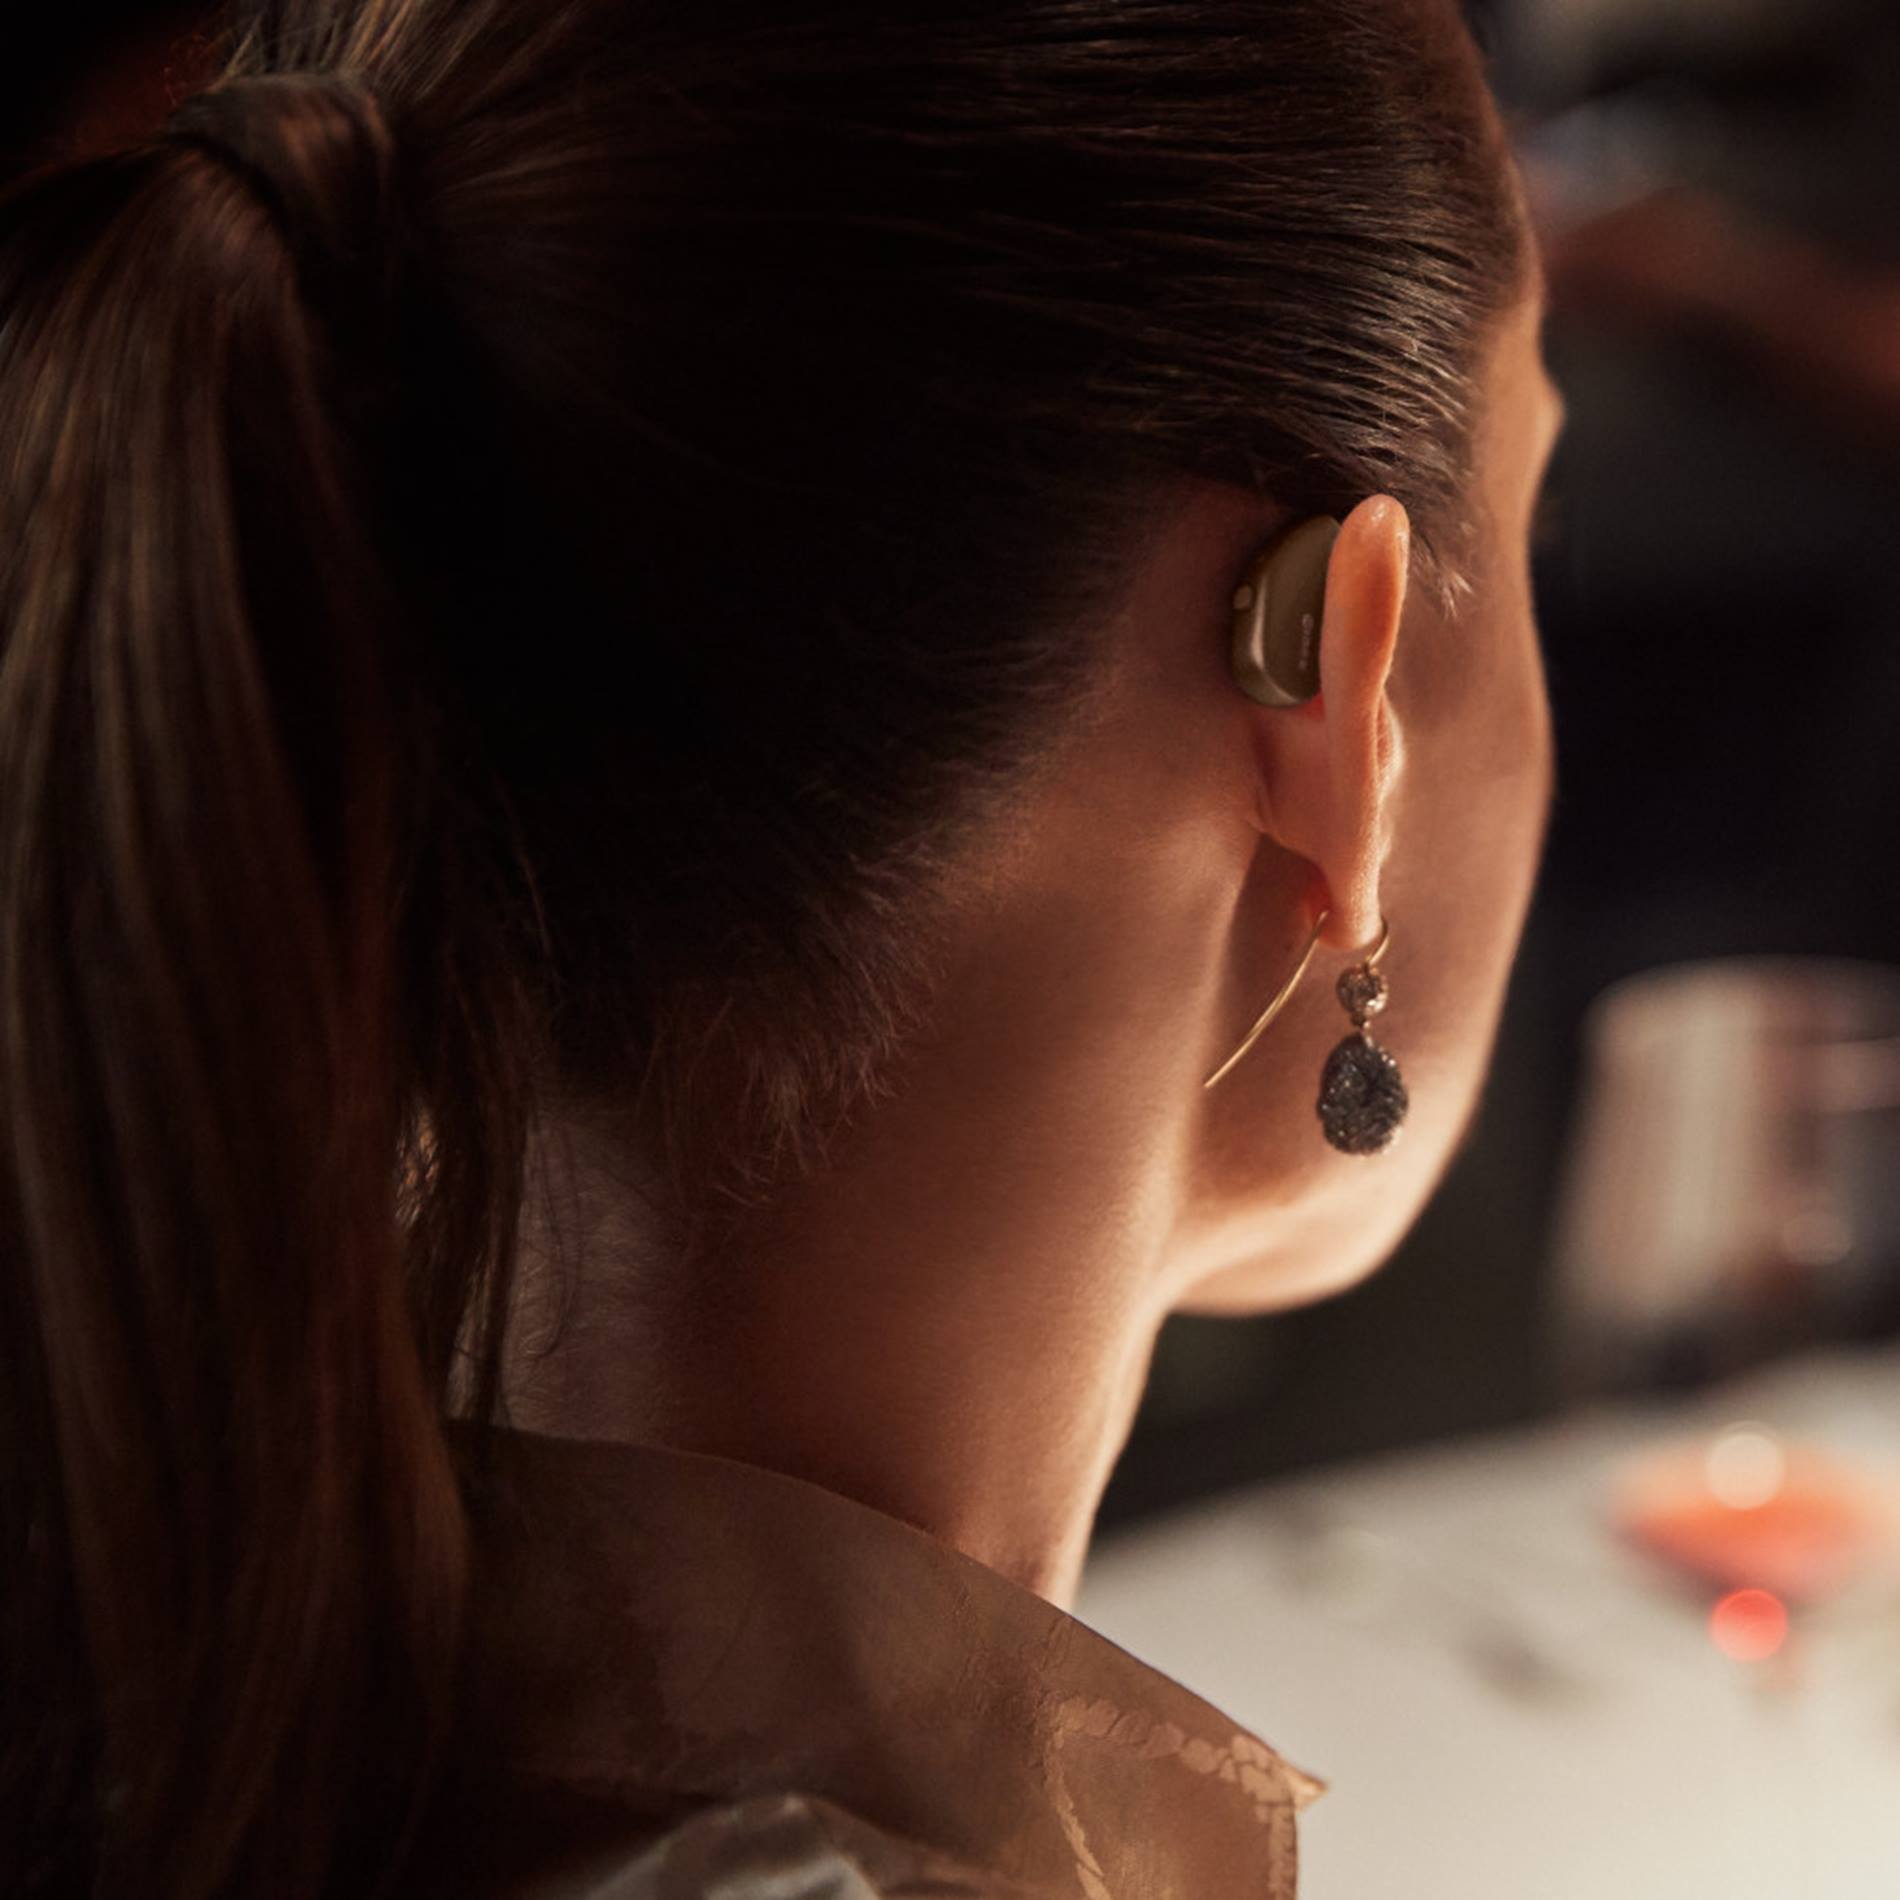 restaurant-woman-with-hearing-aid-seen-from-behind